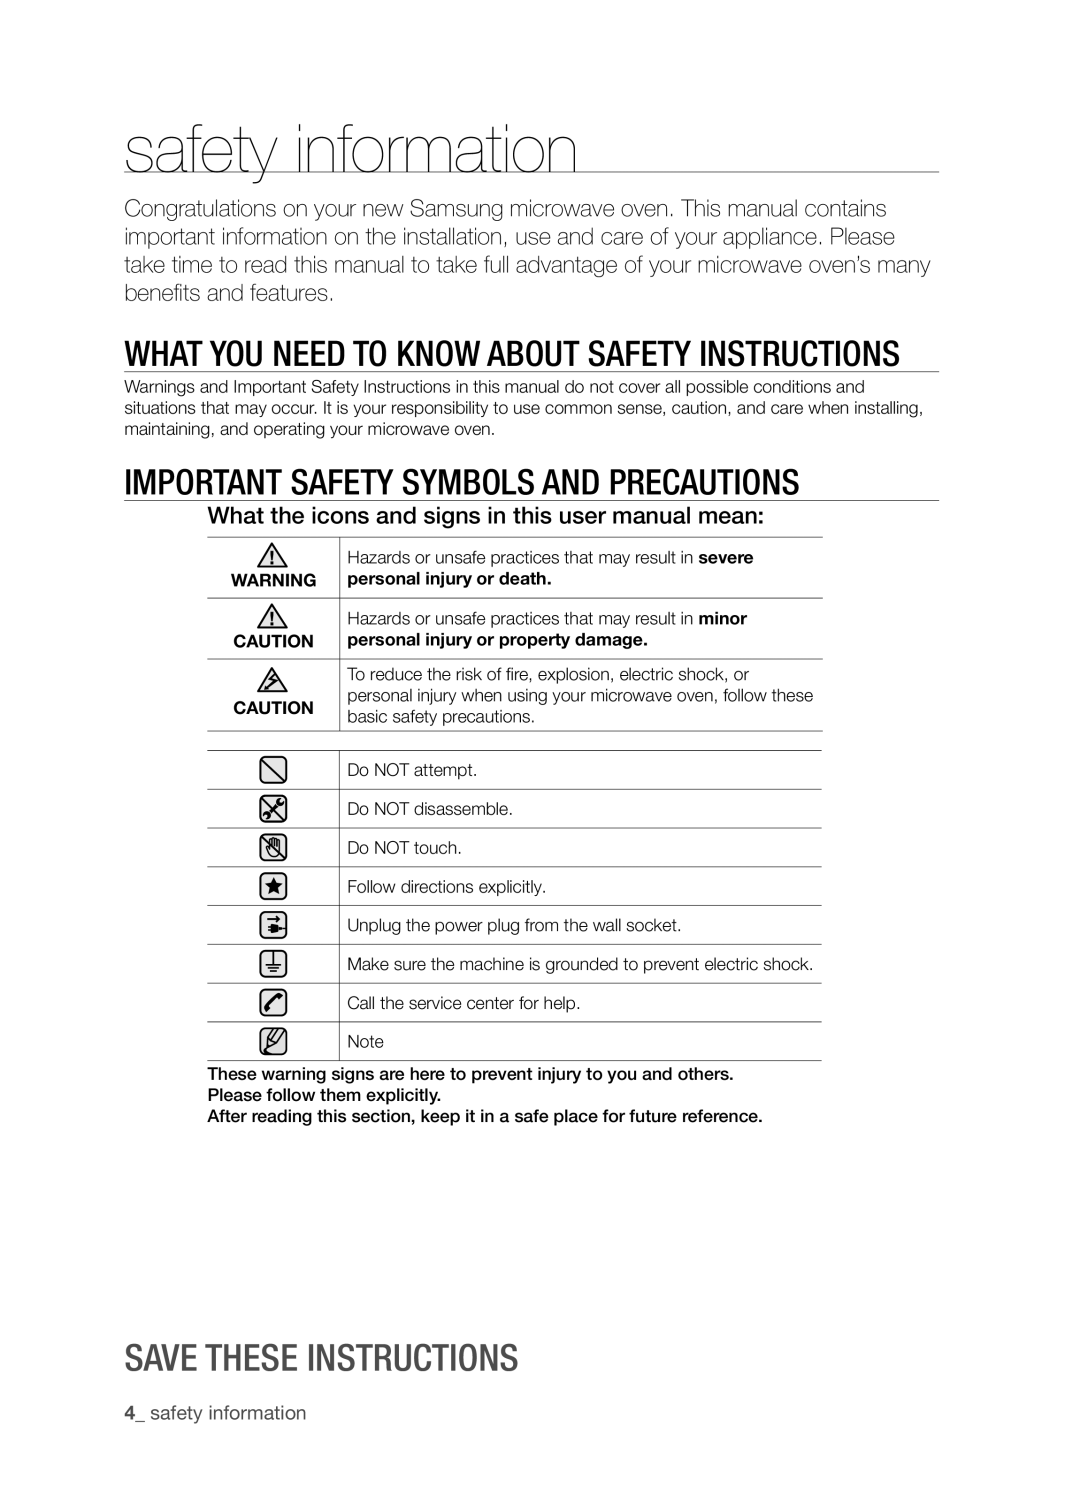 Samsung SMH9151B user manual What you need to know about safety instructions, IMPORTANT safety symbols and precautions 